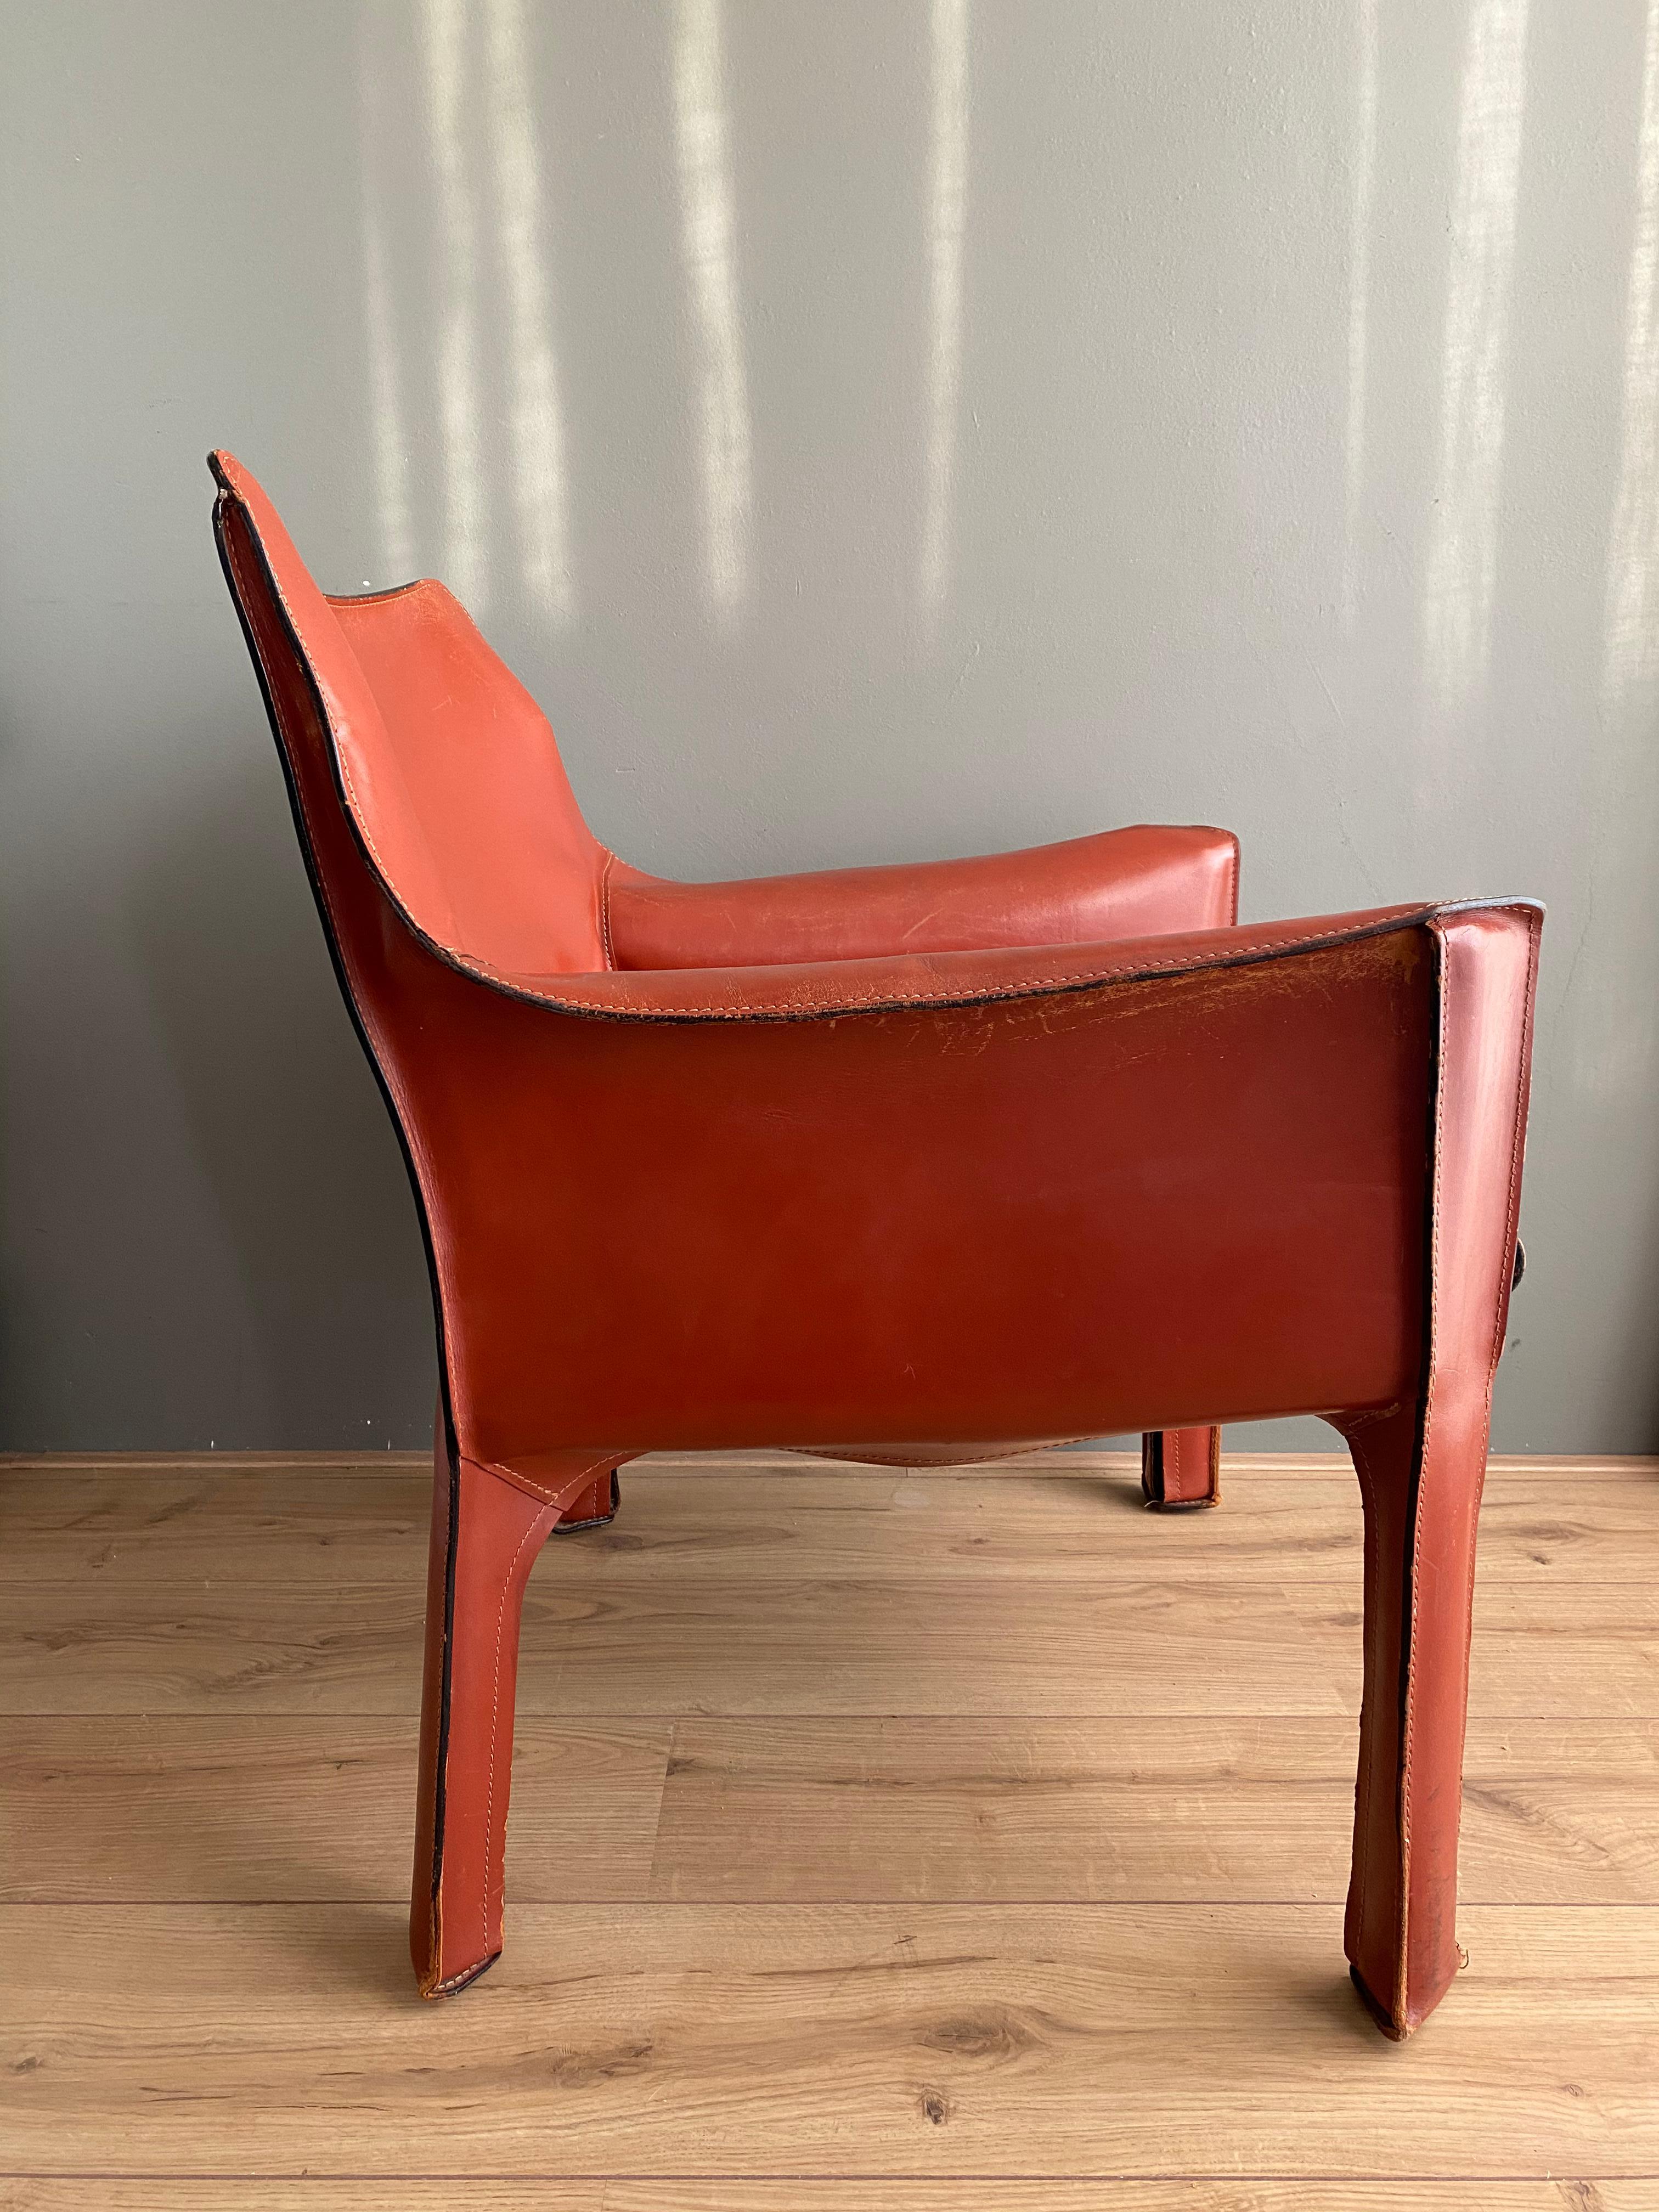 Cognac Leather Cab Lounge Chair by Mario Bellini, 1970s In Good Condition For Sale In Schagen, NL